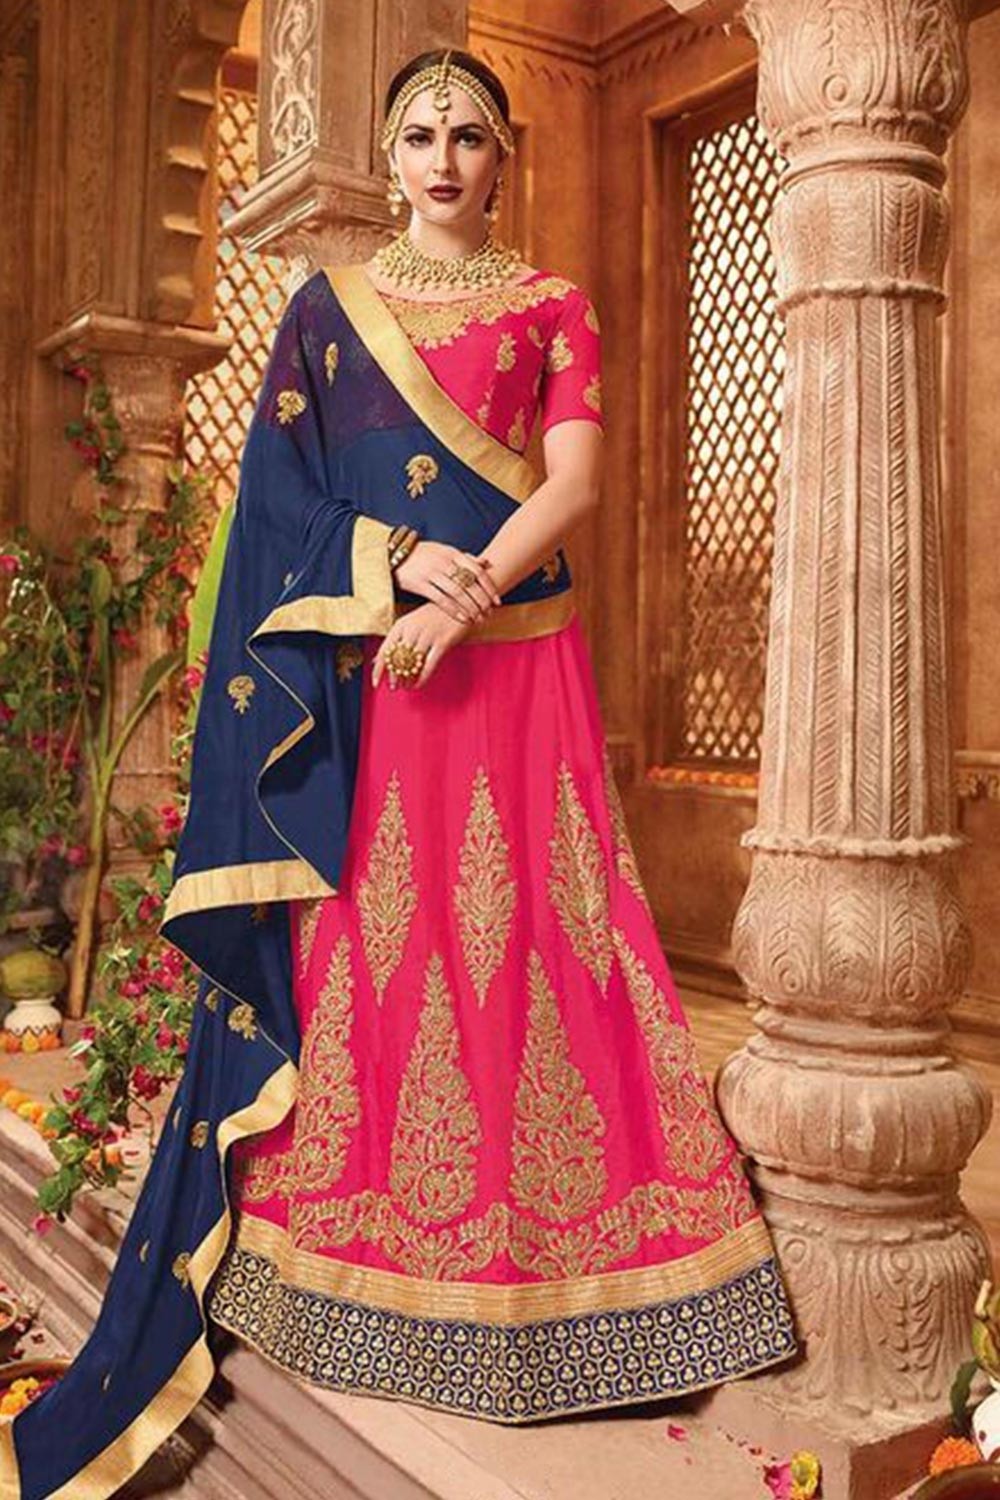 Buy BabyGlow - Fit and Flare Rose Pink Lehenga with Navy Blue Blouse and  Dupatta (2-3 Years) at Amazon.in